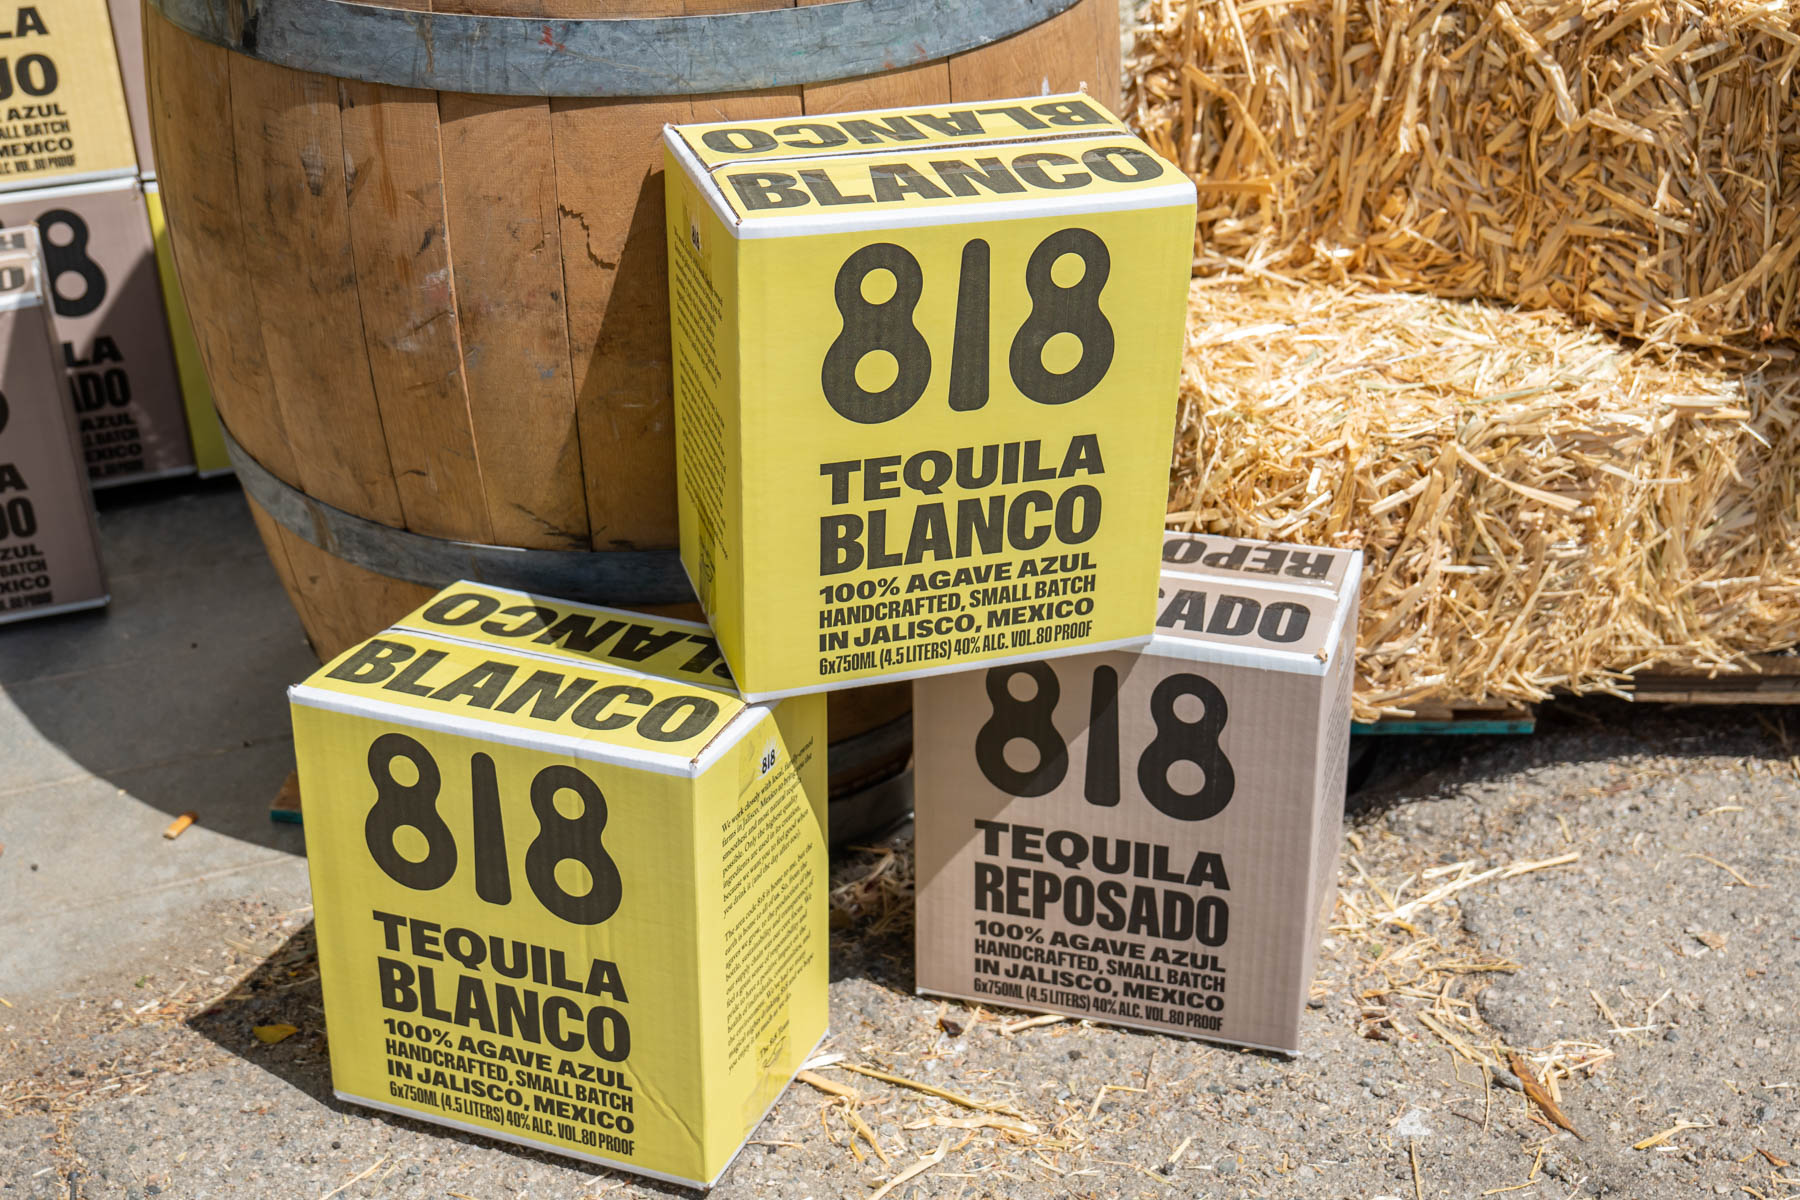 A couple of 818 Tequila boxes against a barrel and hay.